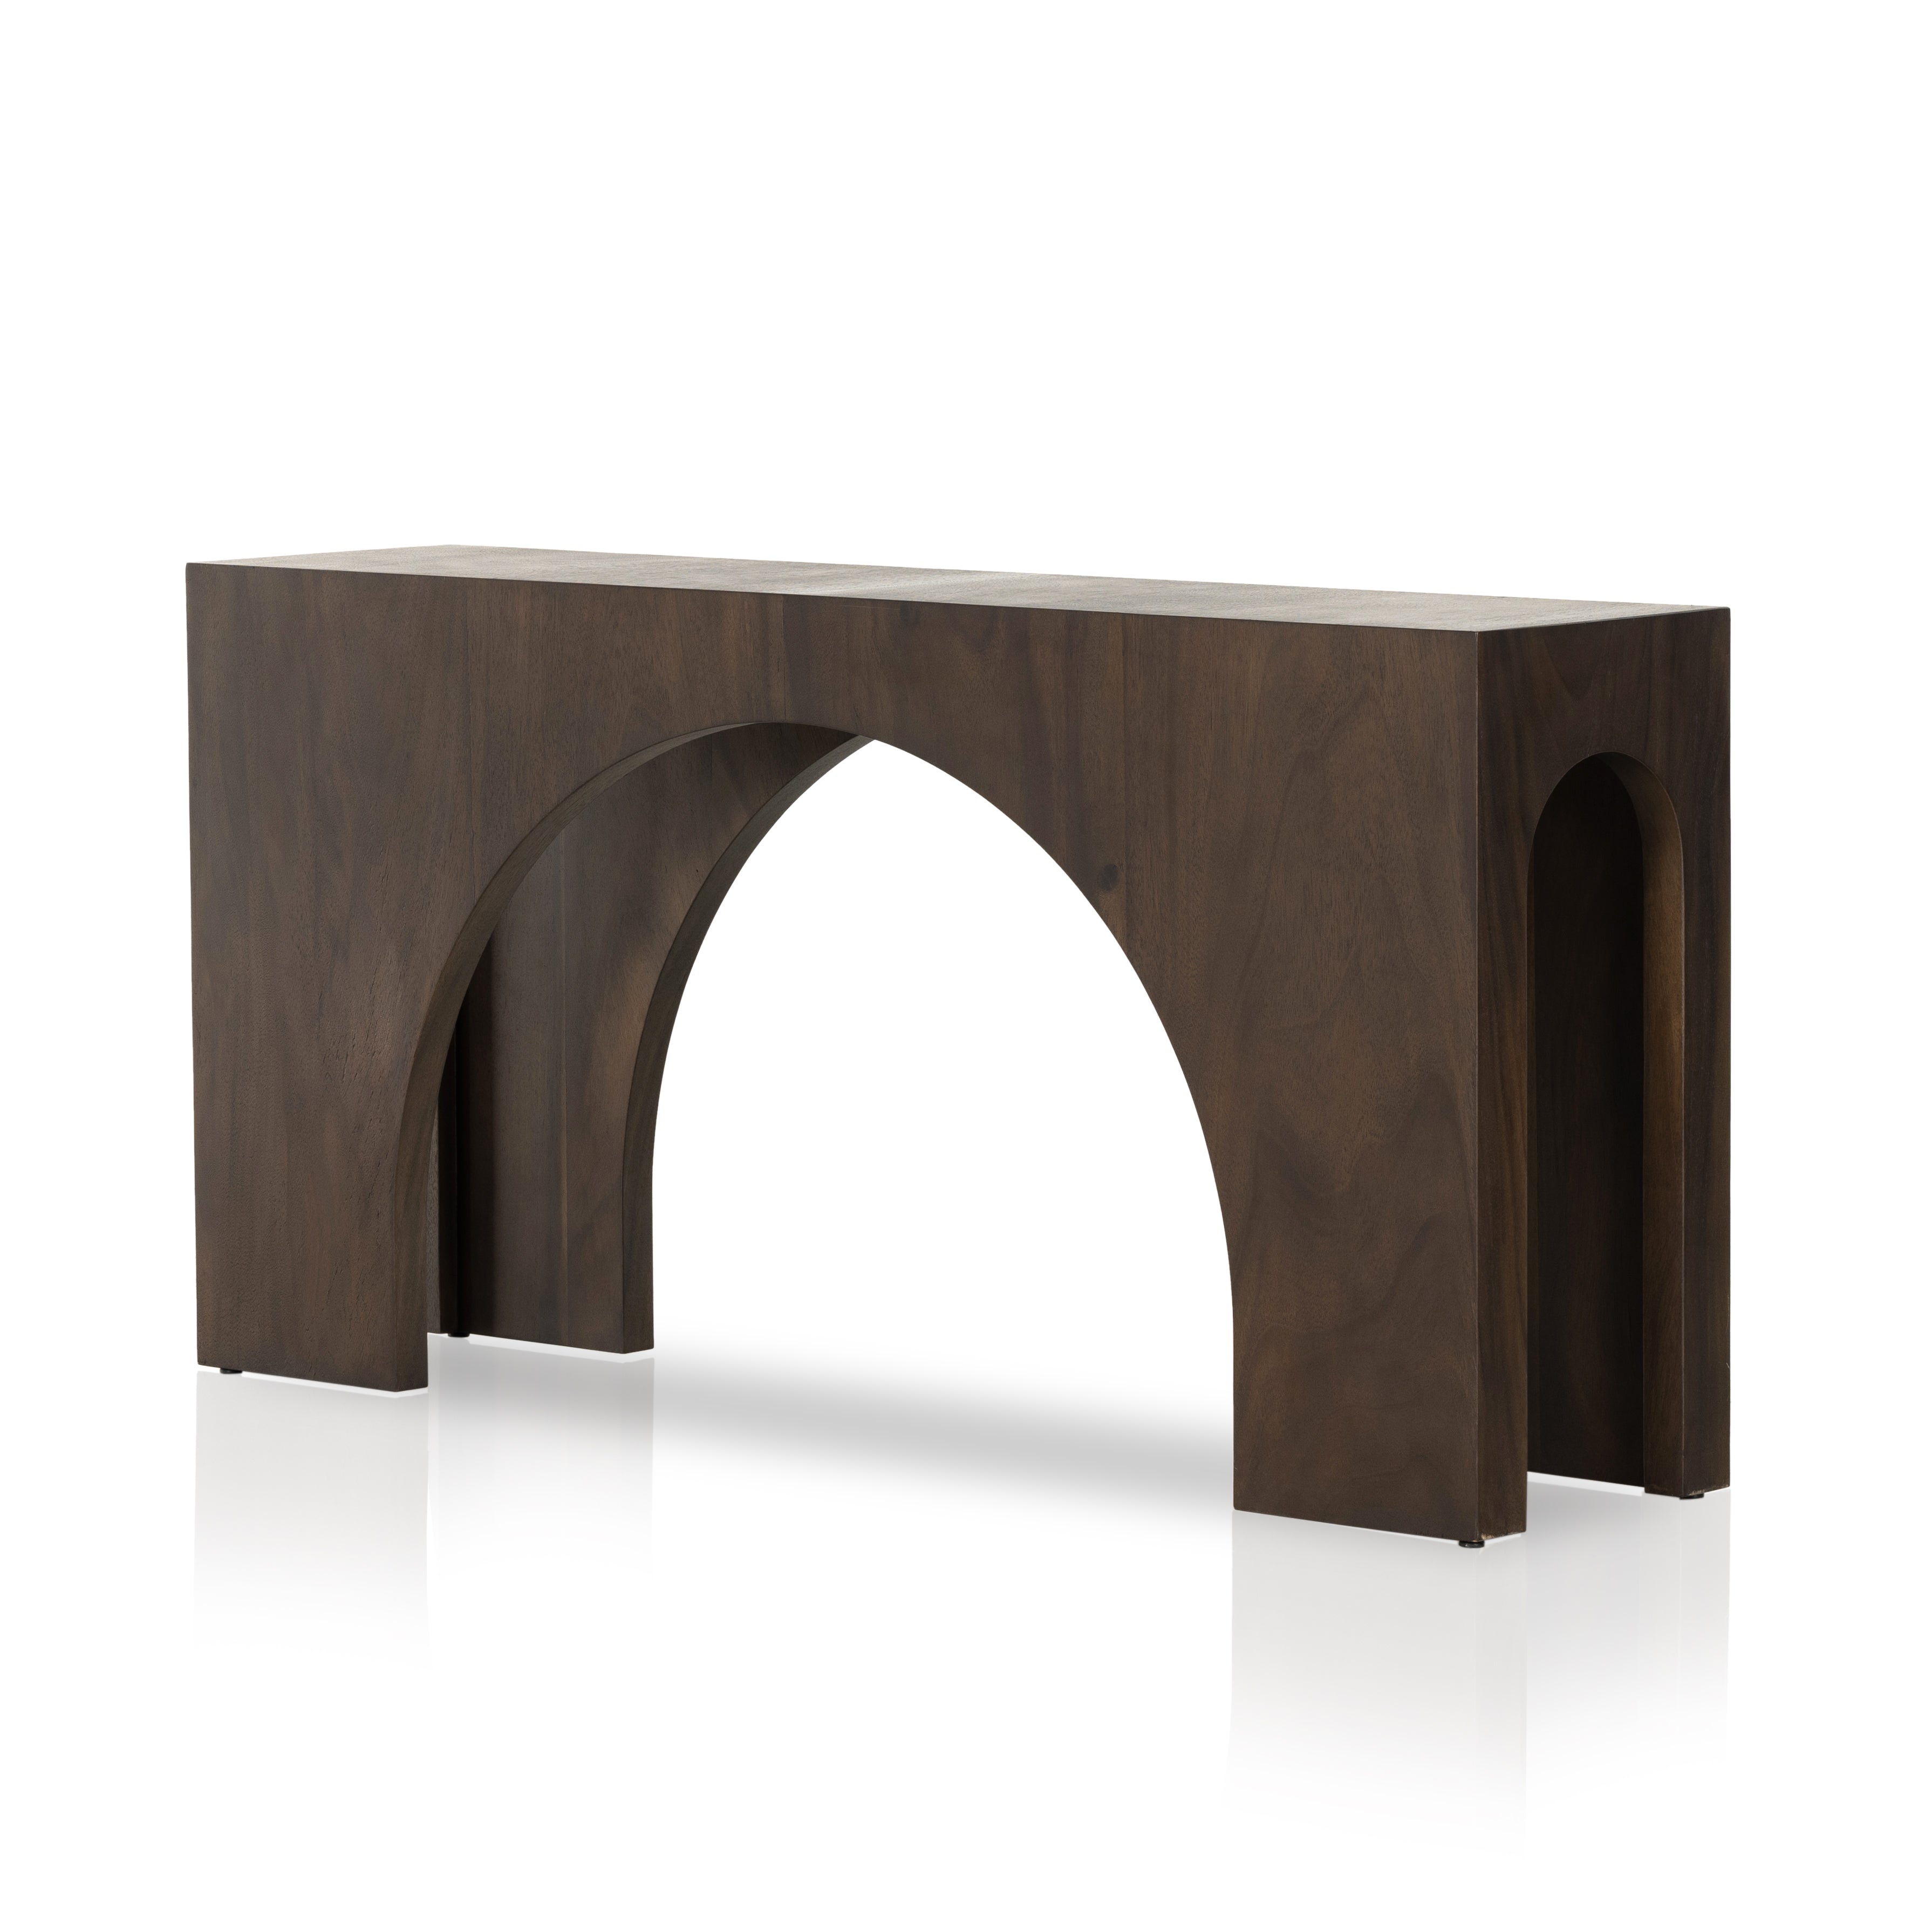 Clean and simple, with great impact. Made from smoked Guanacaste, shapely arches and block corners speak to the architectural inspiration behind this eye-catching console table. Amethyst Home provides interior design, new construction, custom furniture, and area rugs in the Tampa metro area.